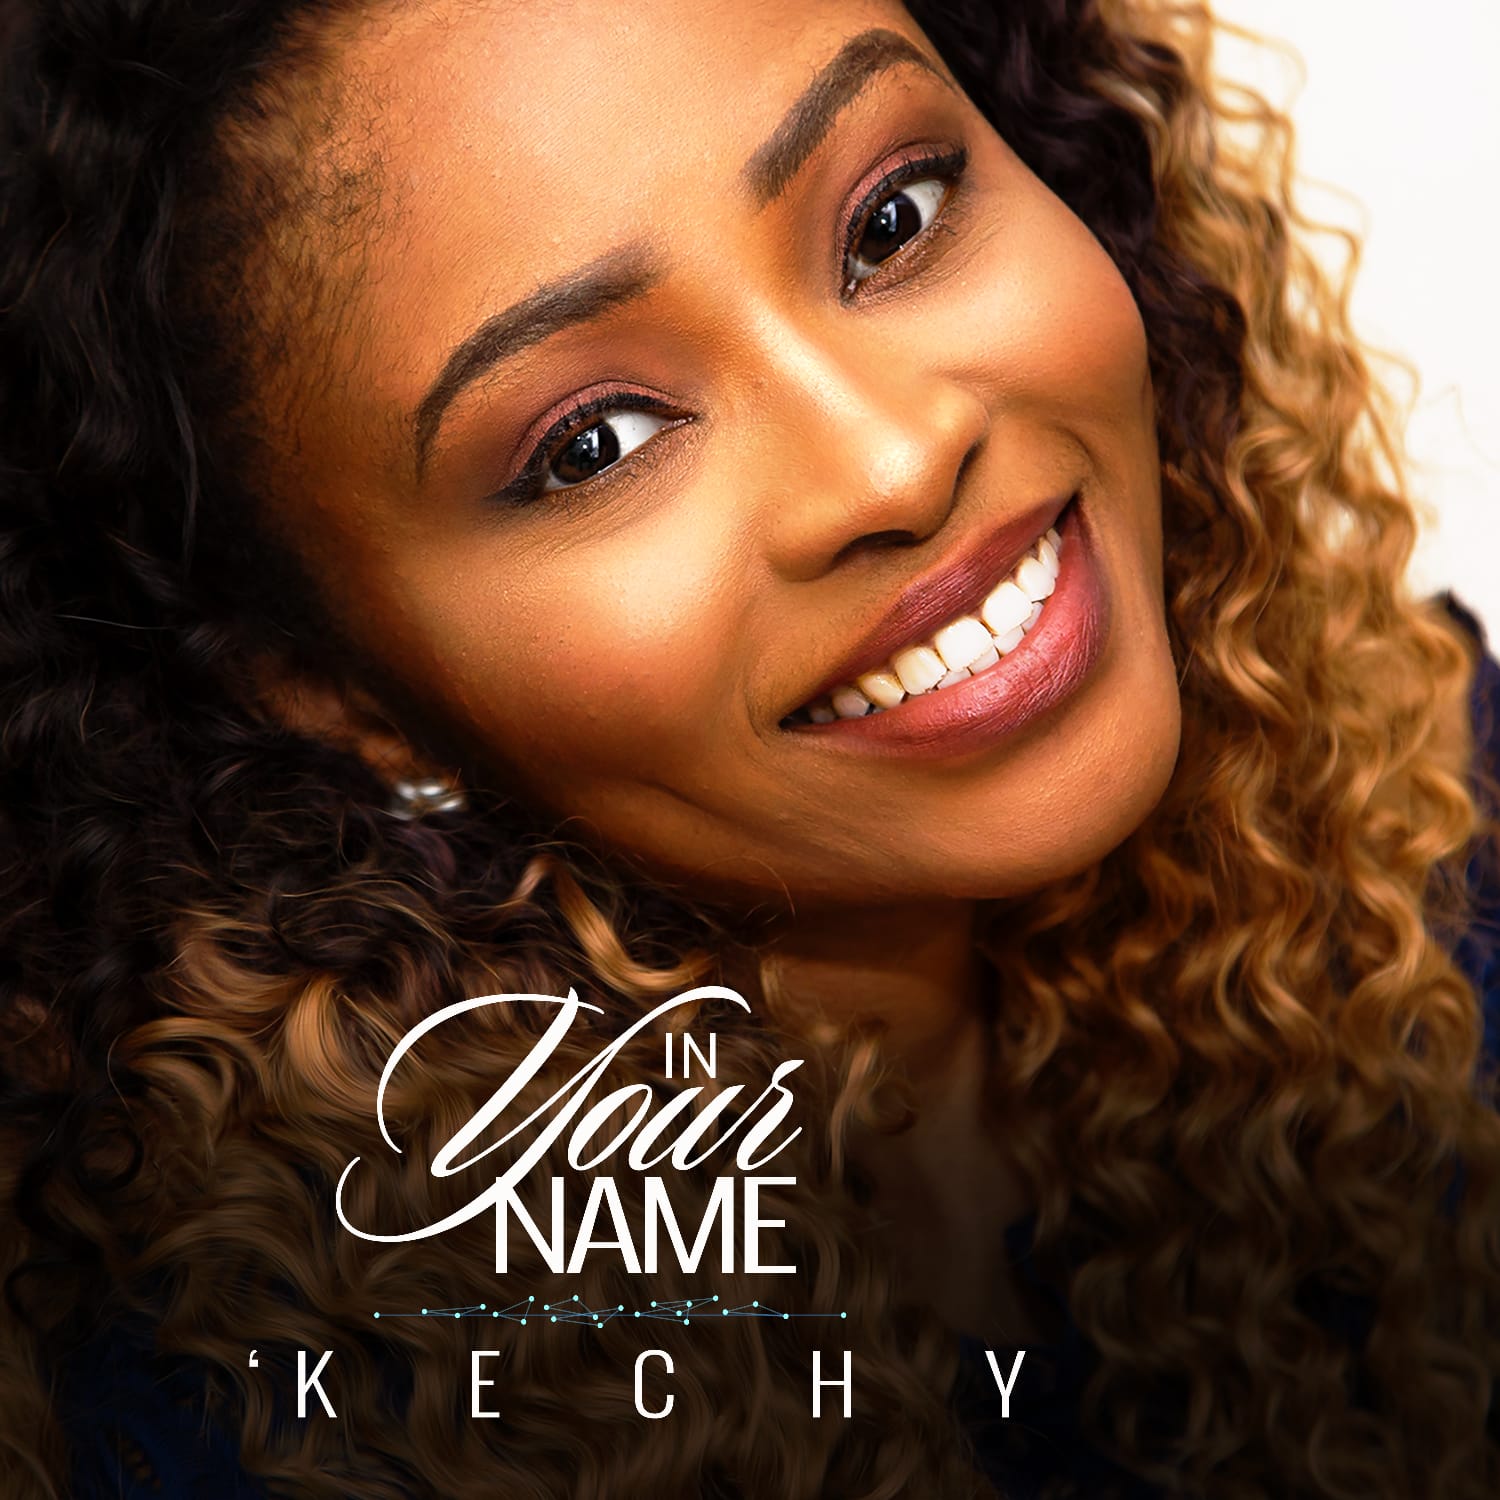 In Your Name - Kechy